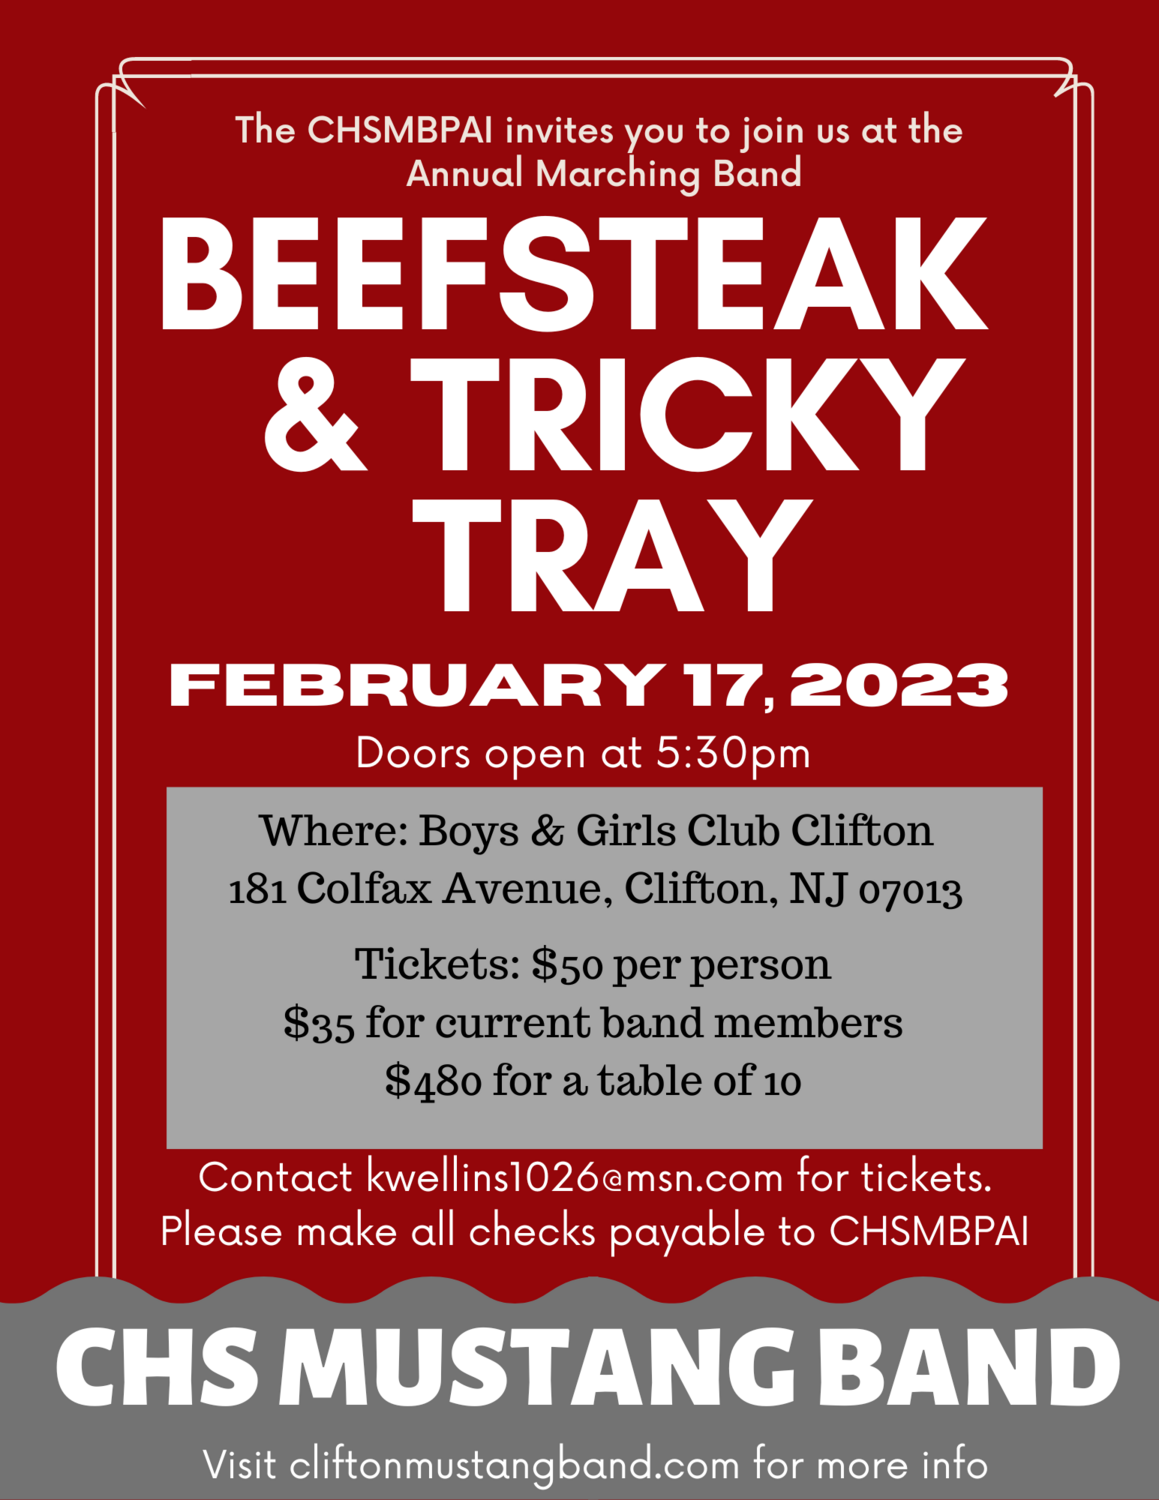 Beefsteak/Tricky Tray - Table of 10